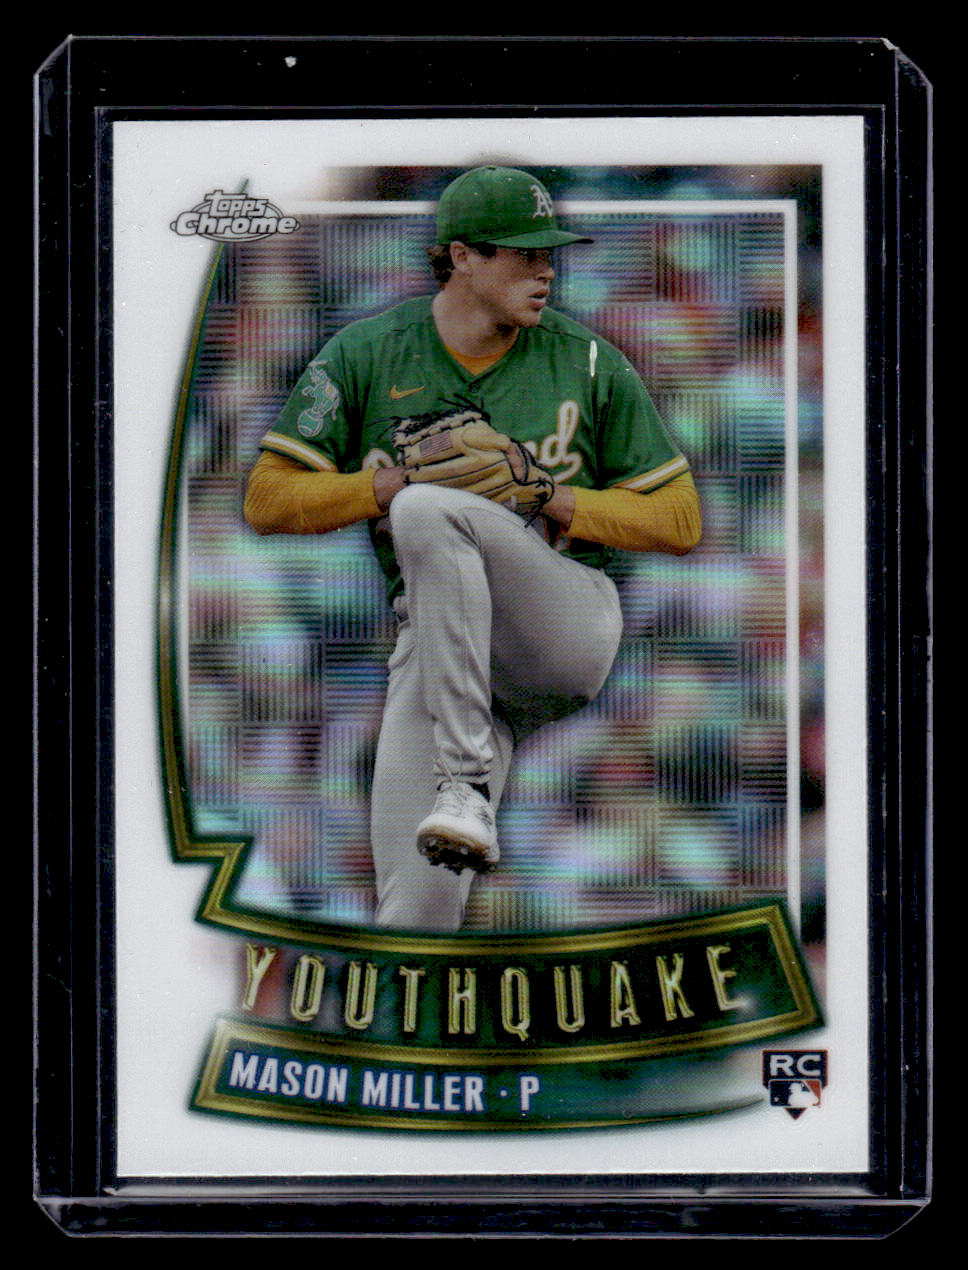 2023 Topps Chrome Update Mason Miller Youthquake Rookie Refractor